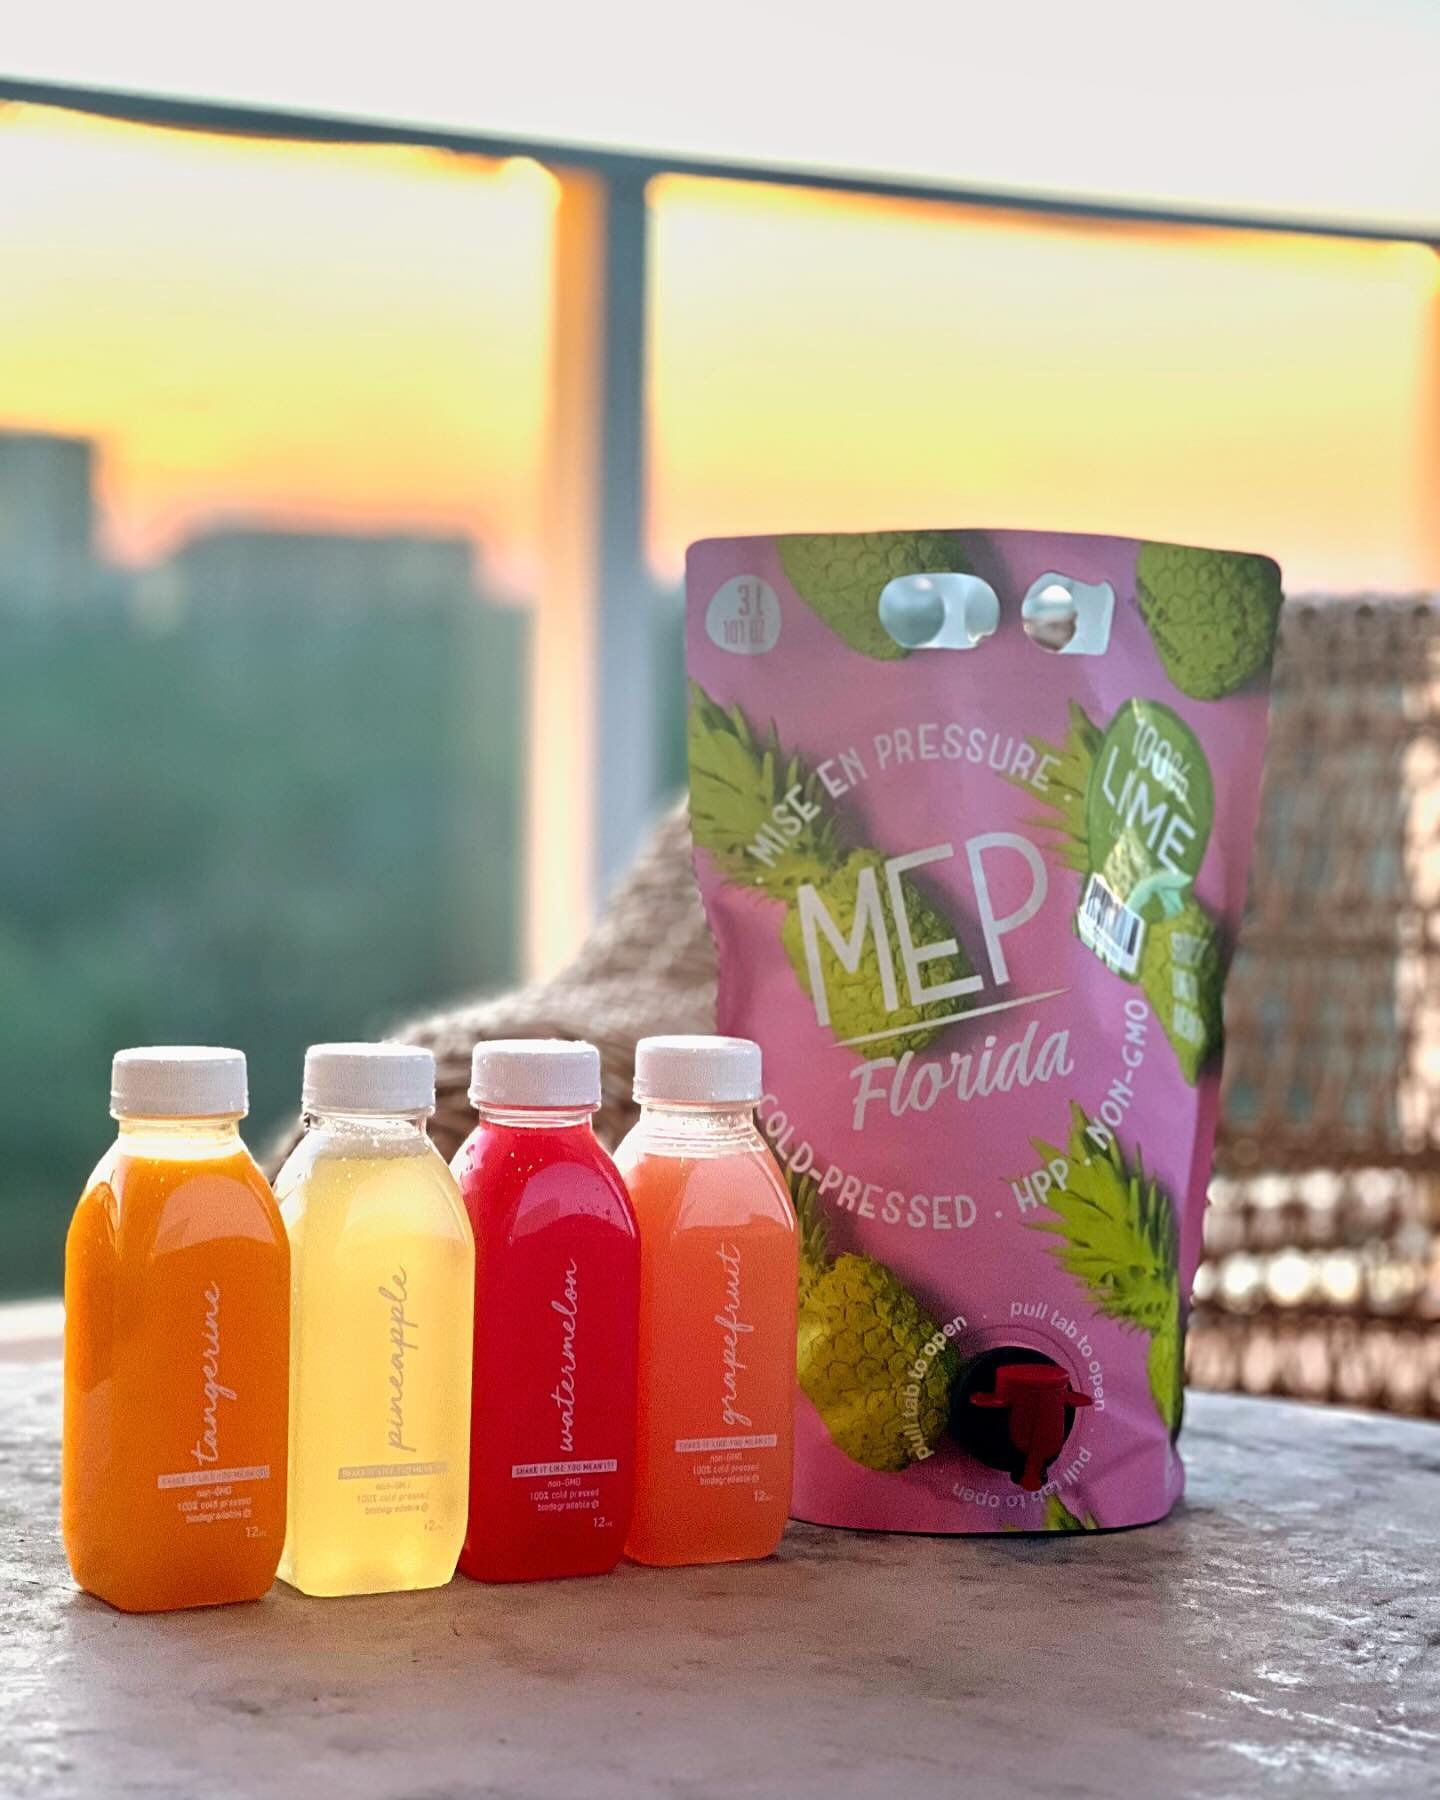 The golden hour is upon us&hellip;. Cheers to the night!

#theperfectmixer #coldpressed #natural #freshjuice #local #juice #freshfruit #sustainable #noadditives #noheat #fresh #cocktail #beverage #nonalcoholic #healthychoice #goodforyou #betterchoice